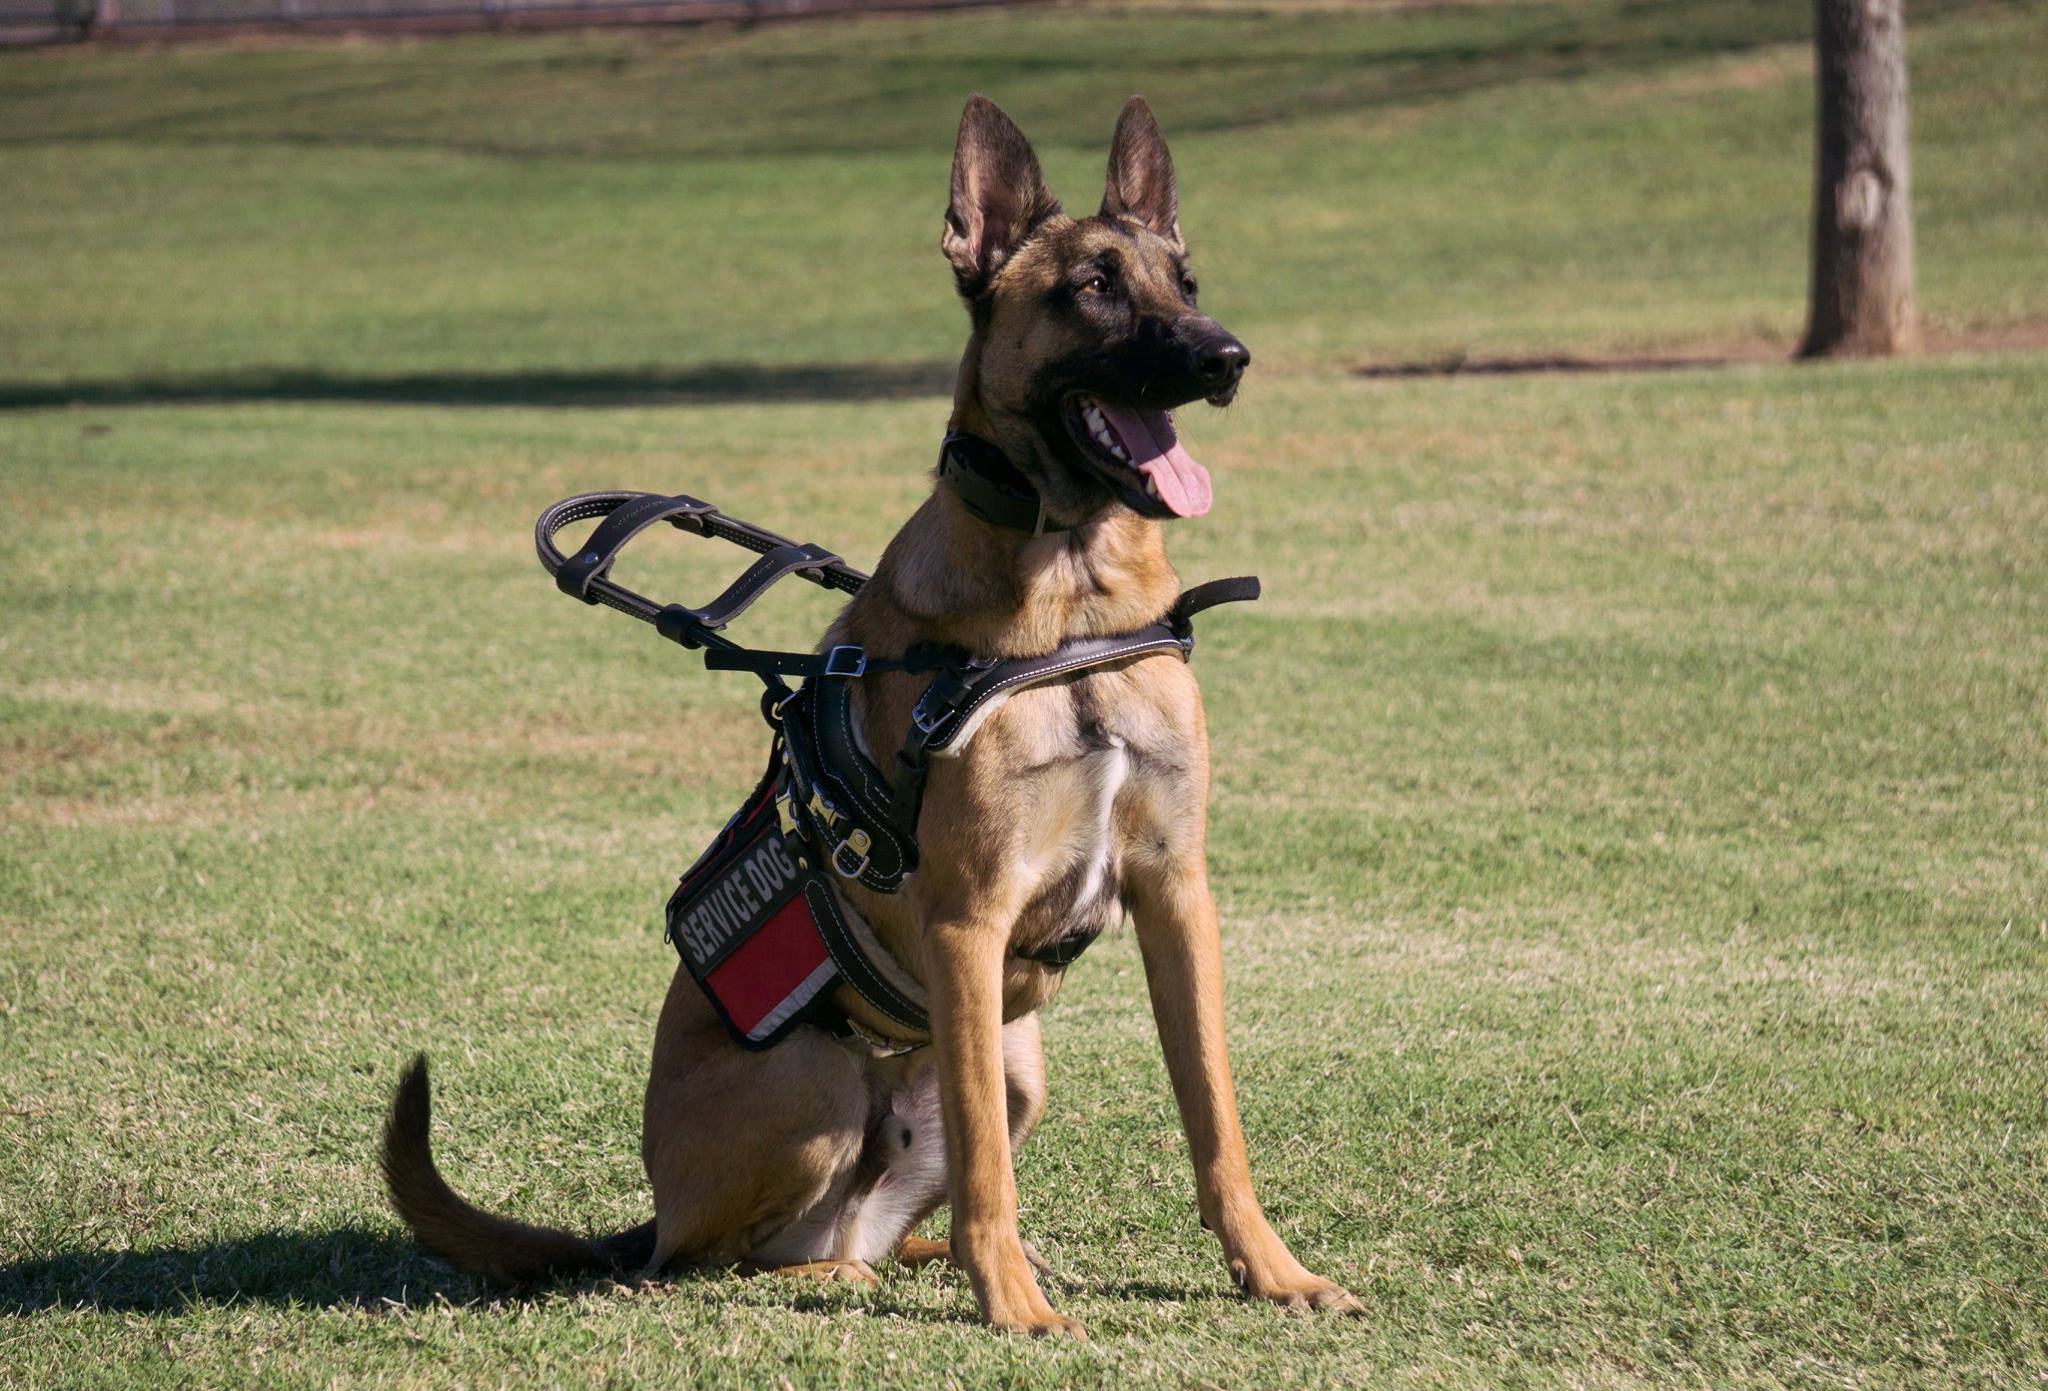 Spending Your Summer with a Service Dog in Greenville